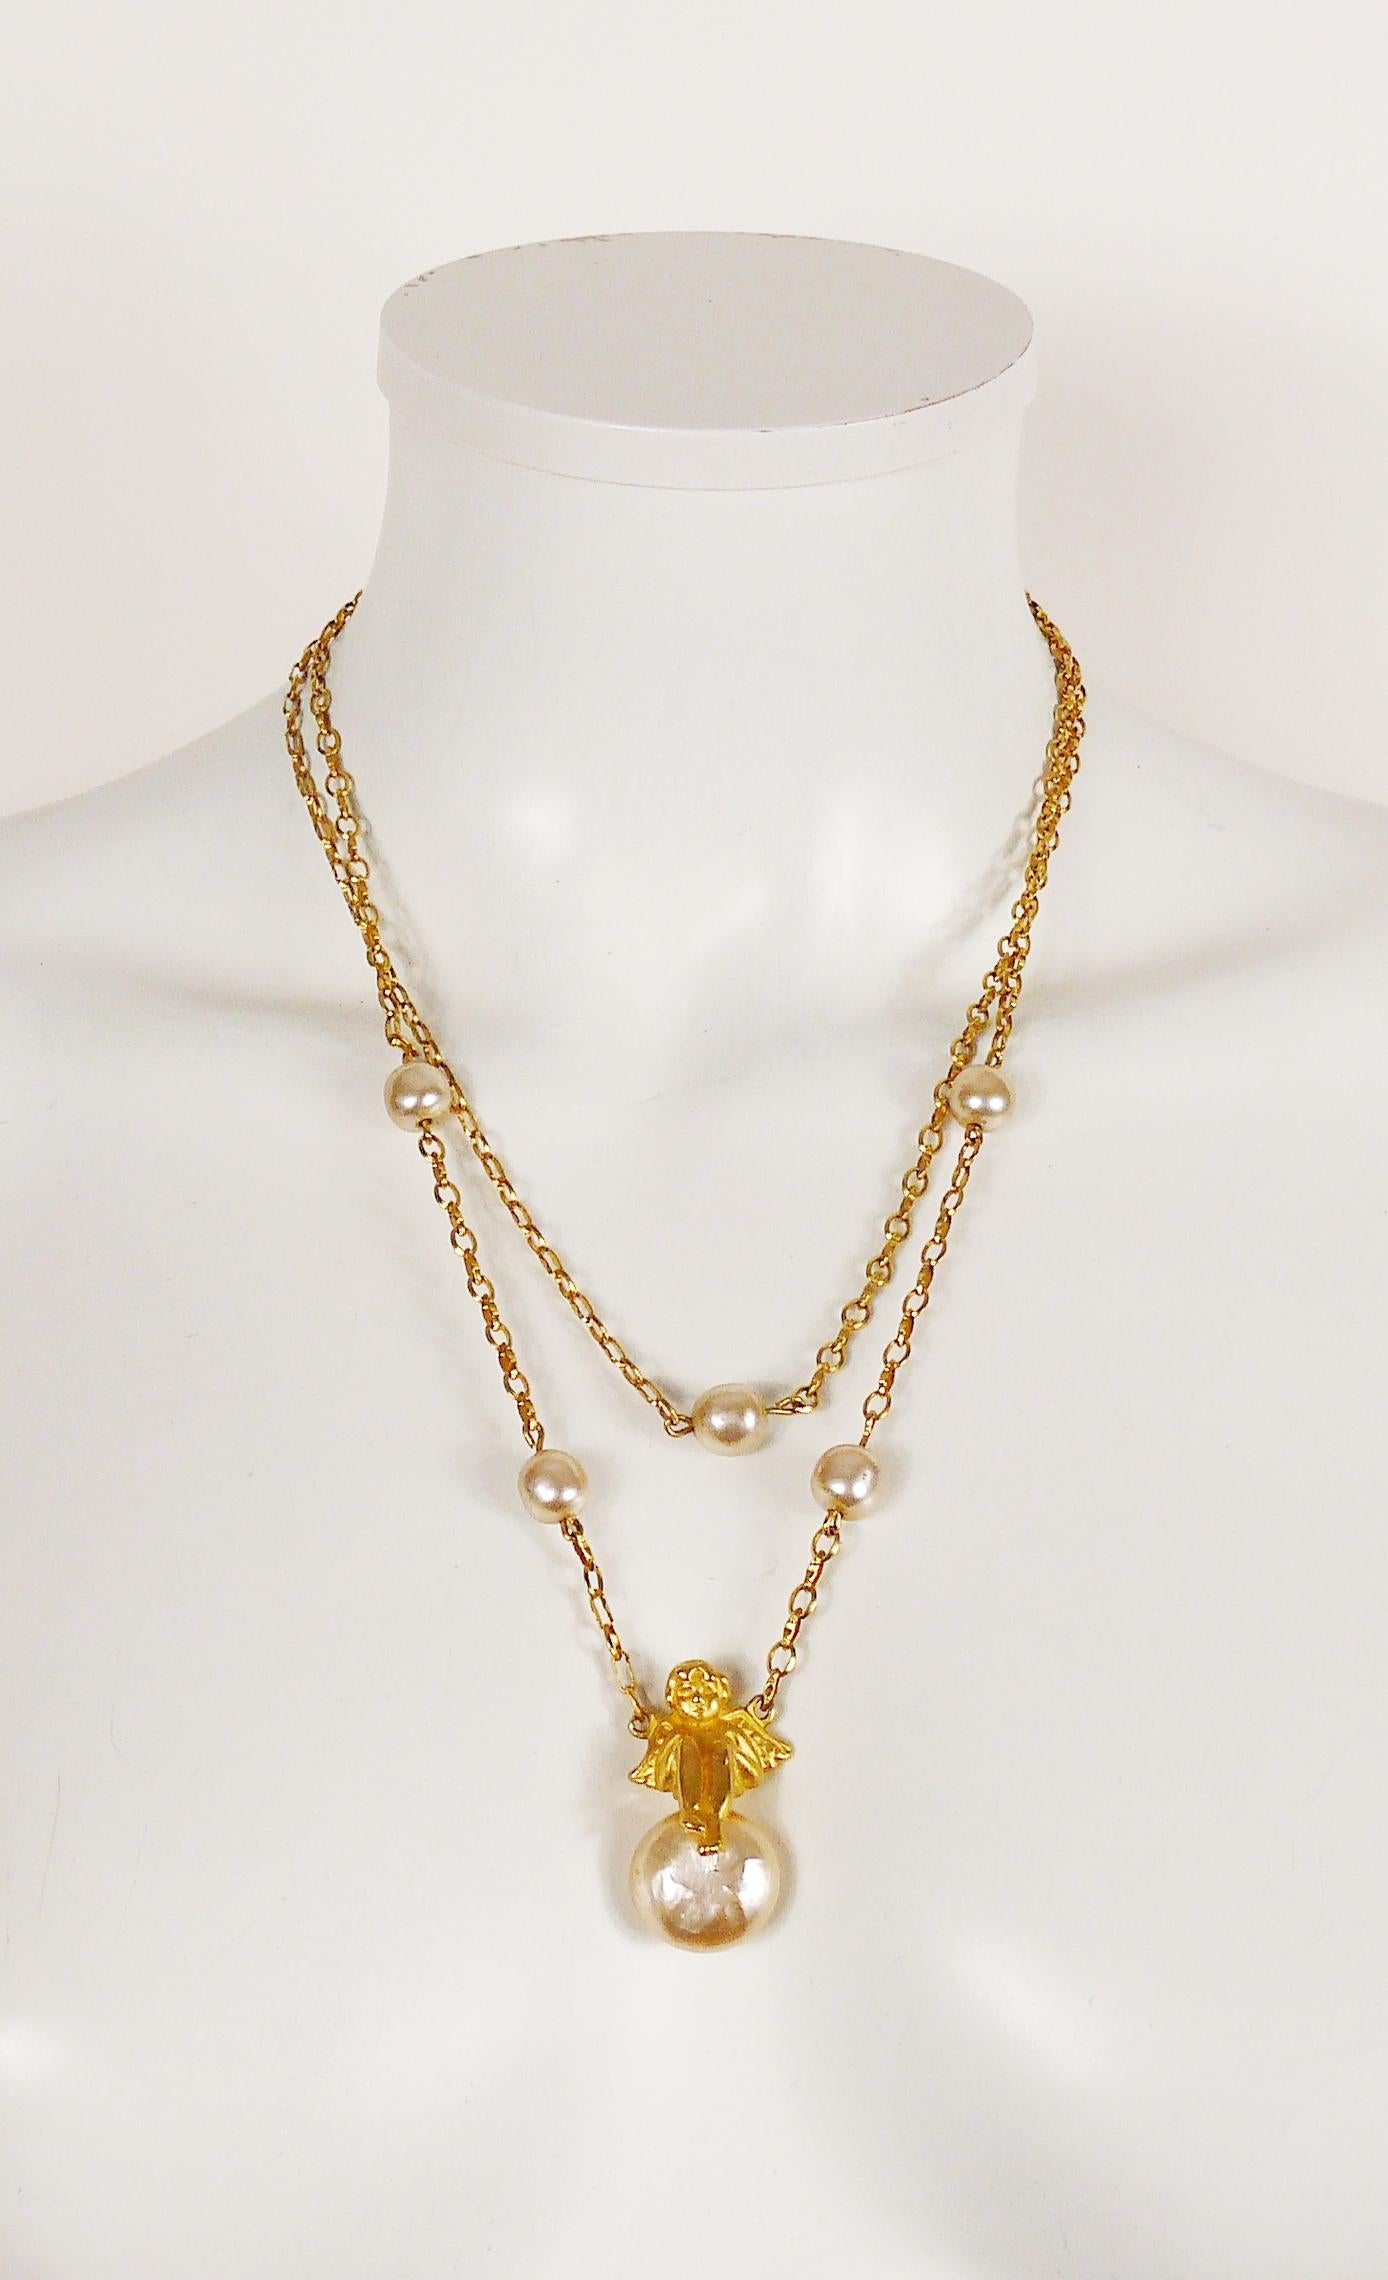 KARL LAGERFELD vintage gold toned two-tier cherub and pearl necklace.

Lobster clasp closure.
Adjustable length.

Embossed KL.

Indicative measurements : chain length from approx. 44.5 cm (17.52 inches) to approx. 50.5 cm (19.88 inches).

JEWELRY